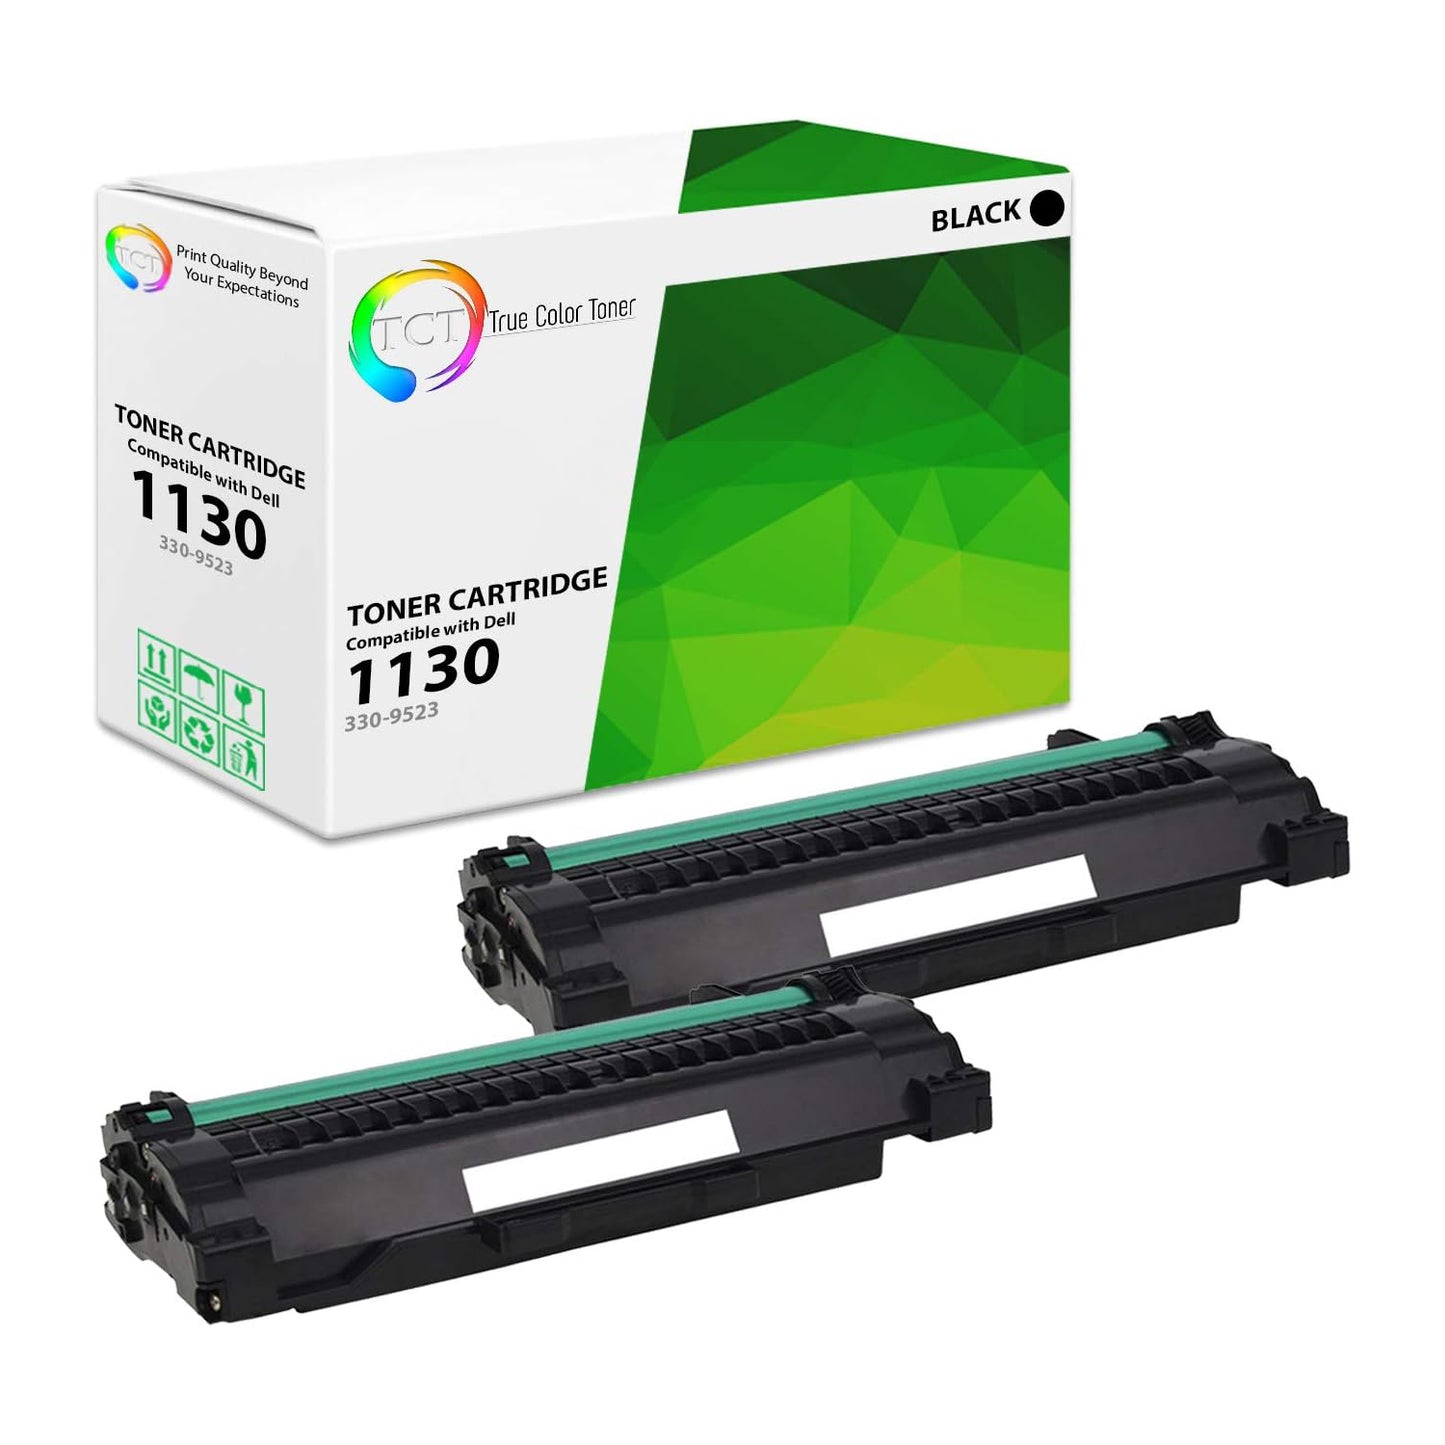 TCT Compatible Toner Cartridge Replacement for the Dell 1130 Series - 2 Pack Black